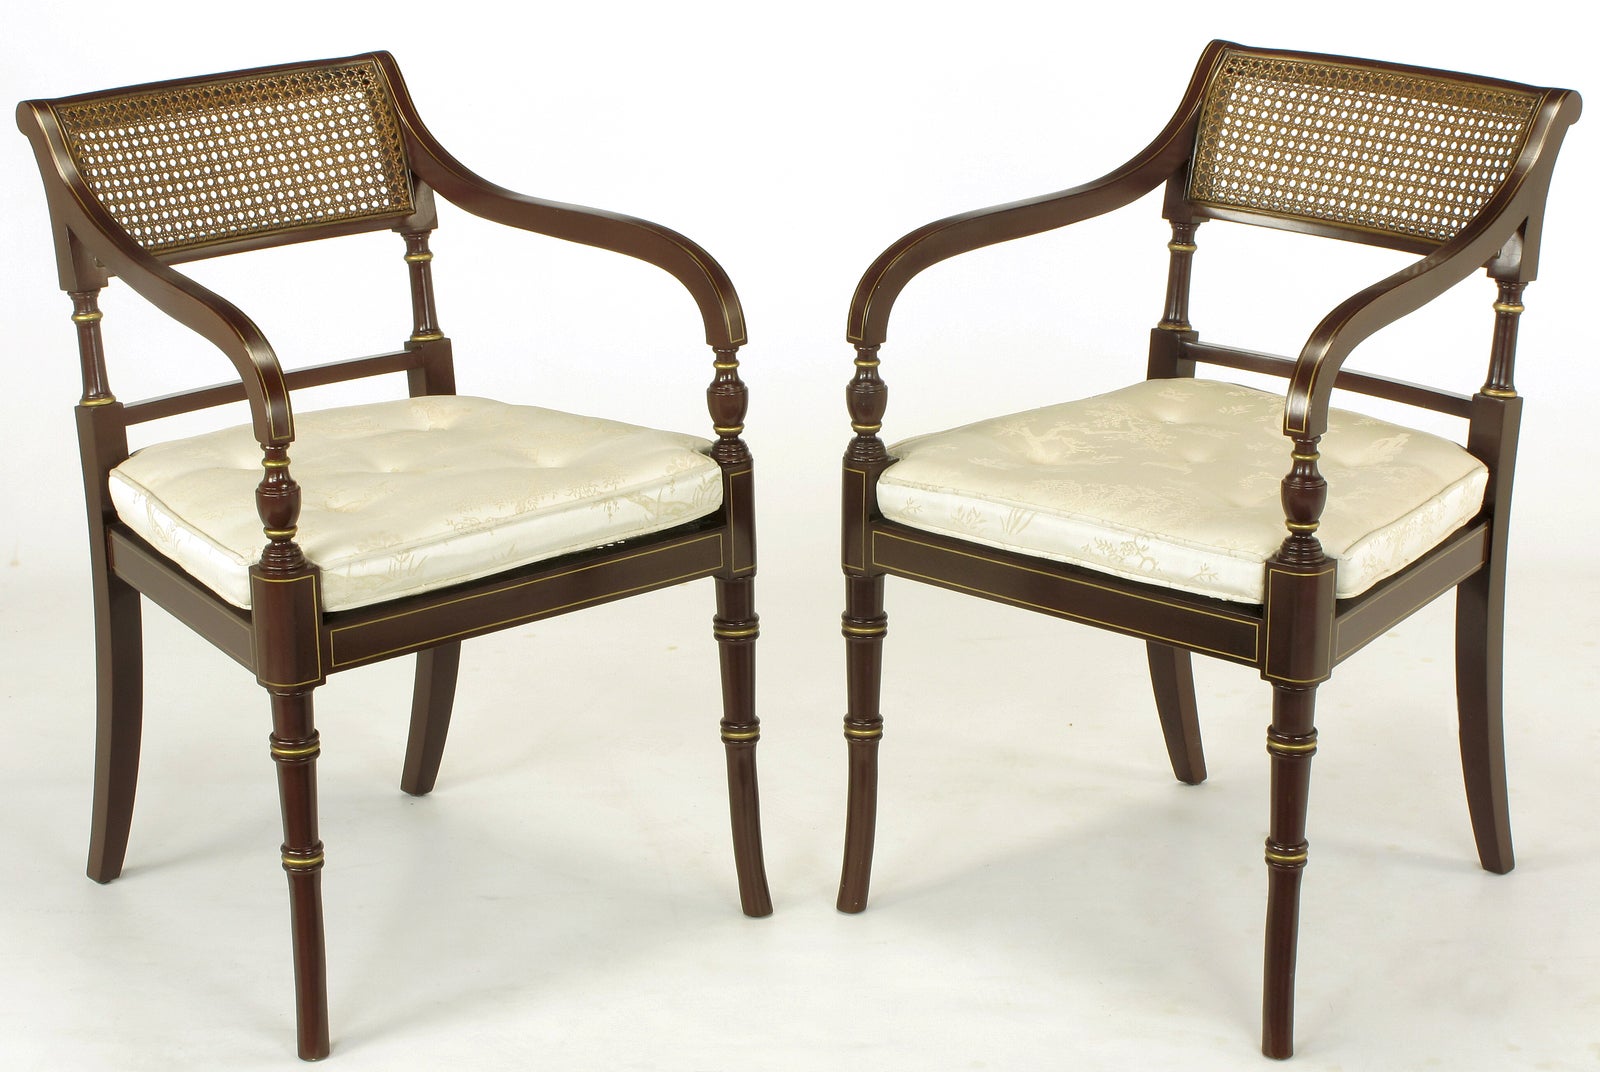 Pair Kindel Regency Arm Chairs In Oxblood Lacquer & Parcel Gilt